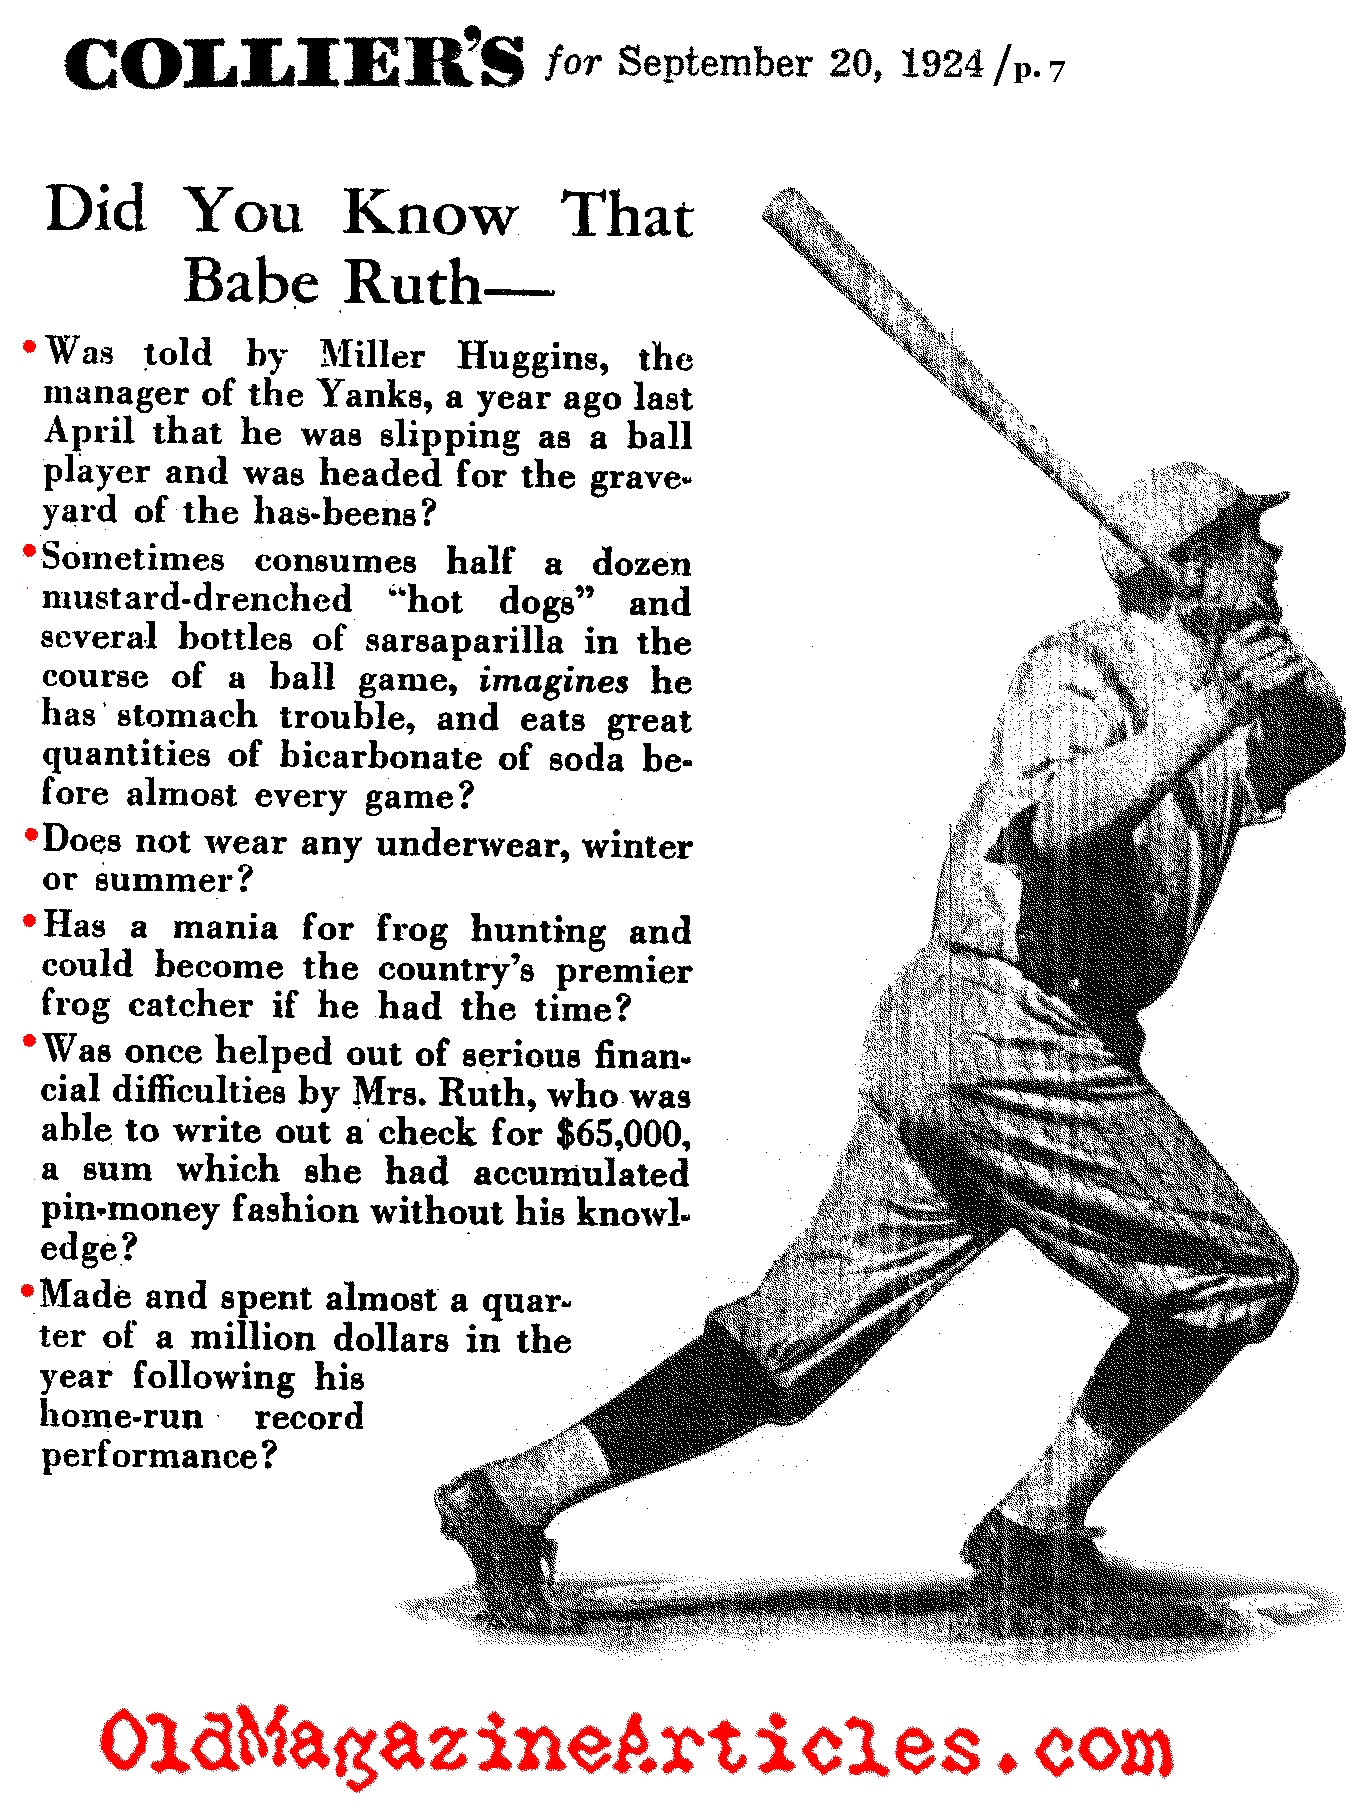 The Little Things That Made Babe Ruth (Colliers' Magazine, 1924)